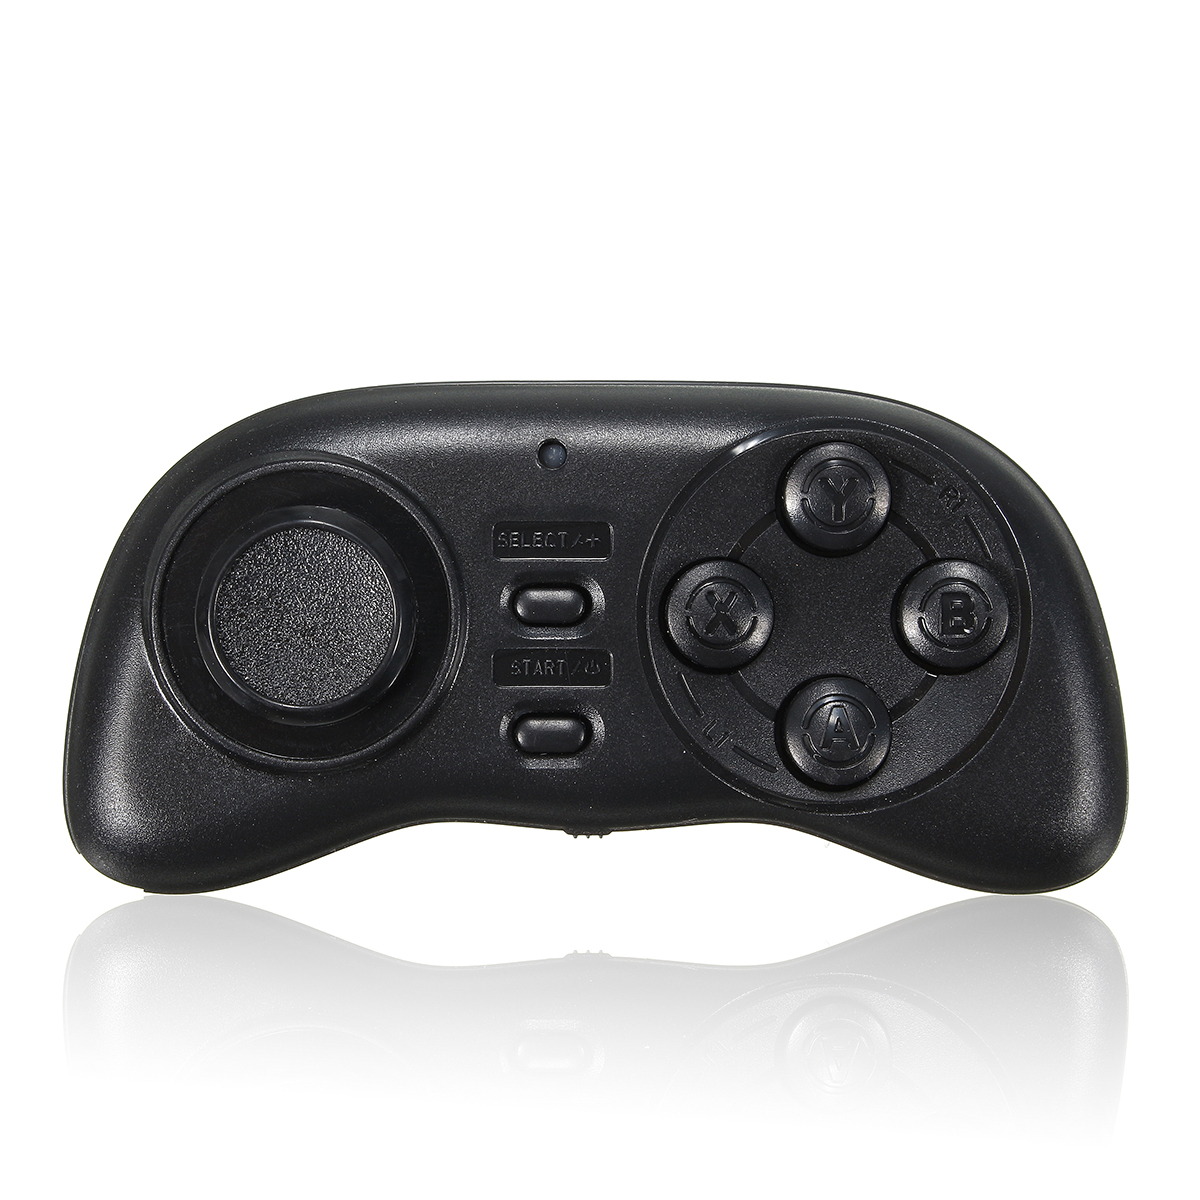 

Wireless Bluetooth Selfie Remote Joystick Gamepad VR Controller for IOS Android PC TV